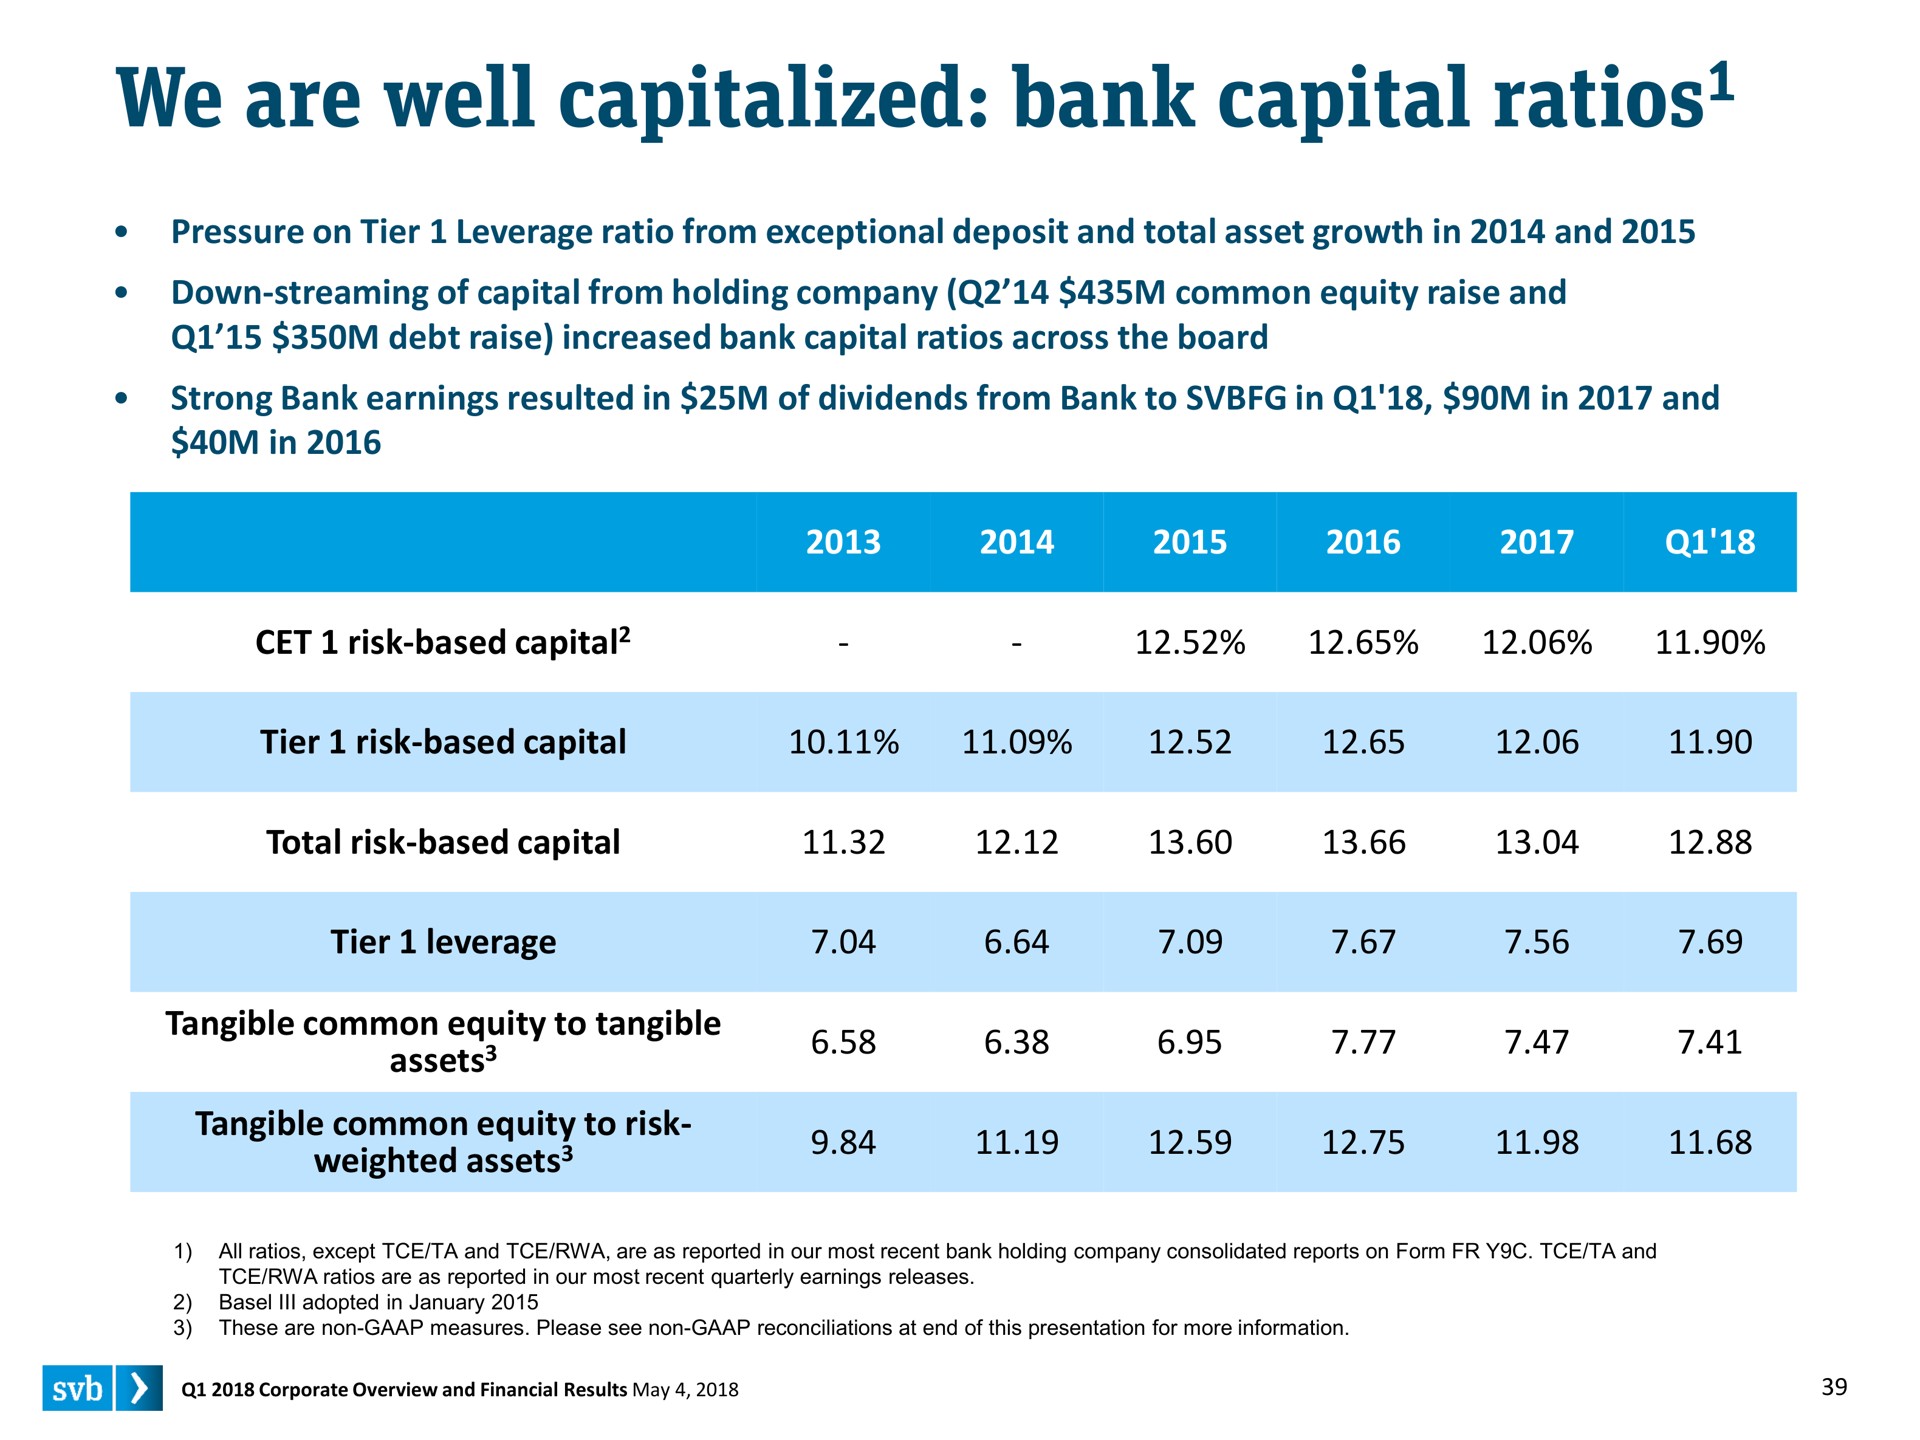 we are well capitalized bank capital ratios ratios tangible common equity | Silicon Valley Bank